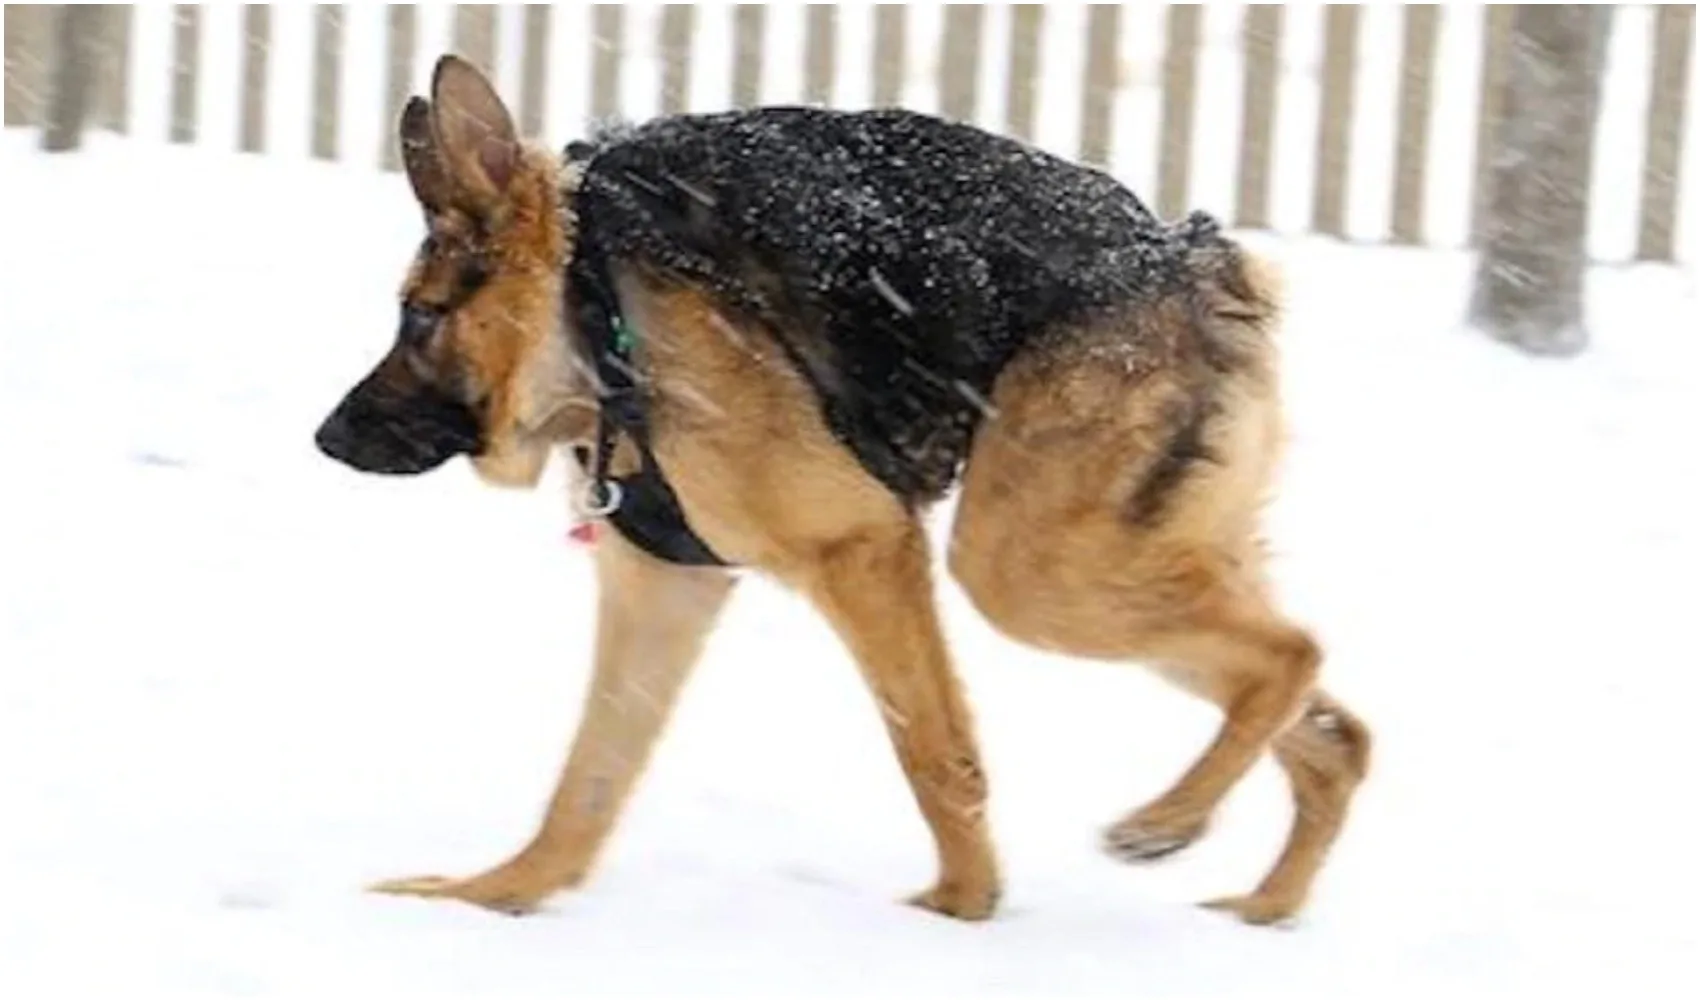 Dogs With Short Spine Syndrome Is a rare health condition that is shortening the back of dogs